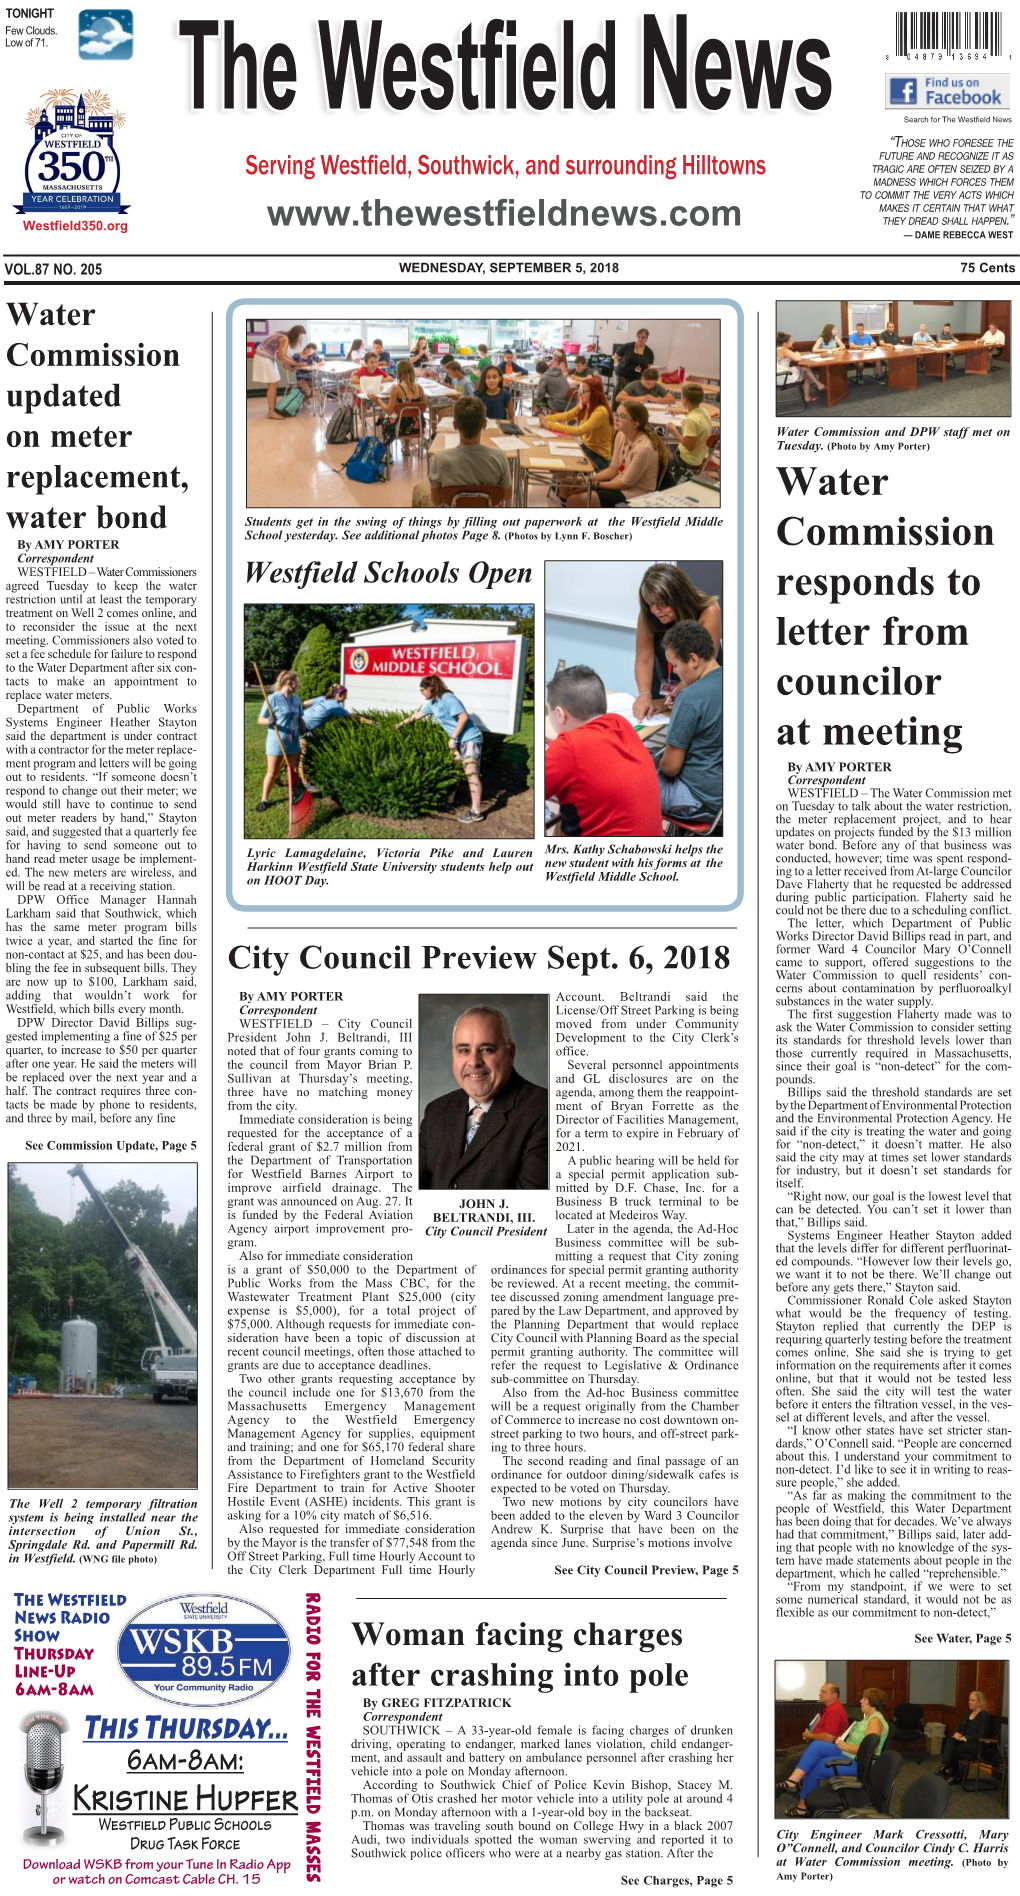 Water Commission Responds to Letter from Councilor at Meeting